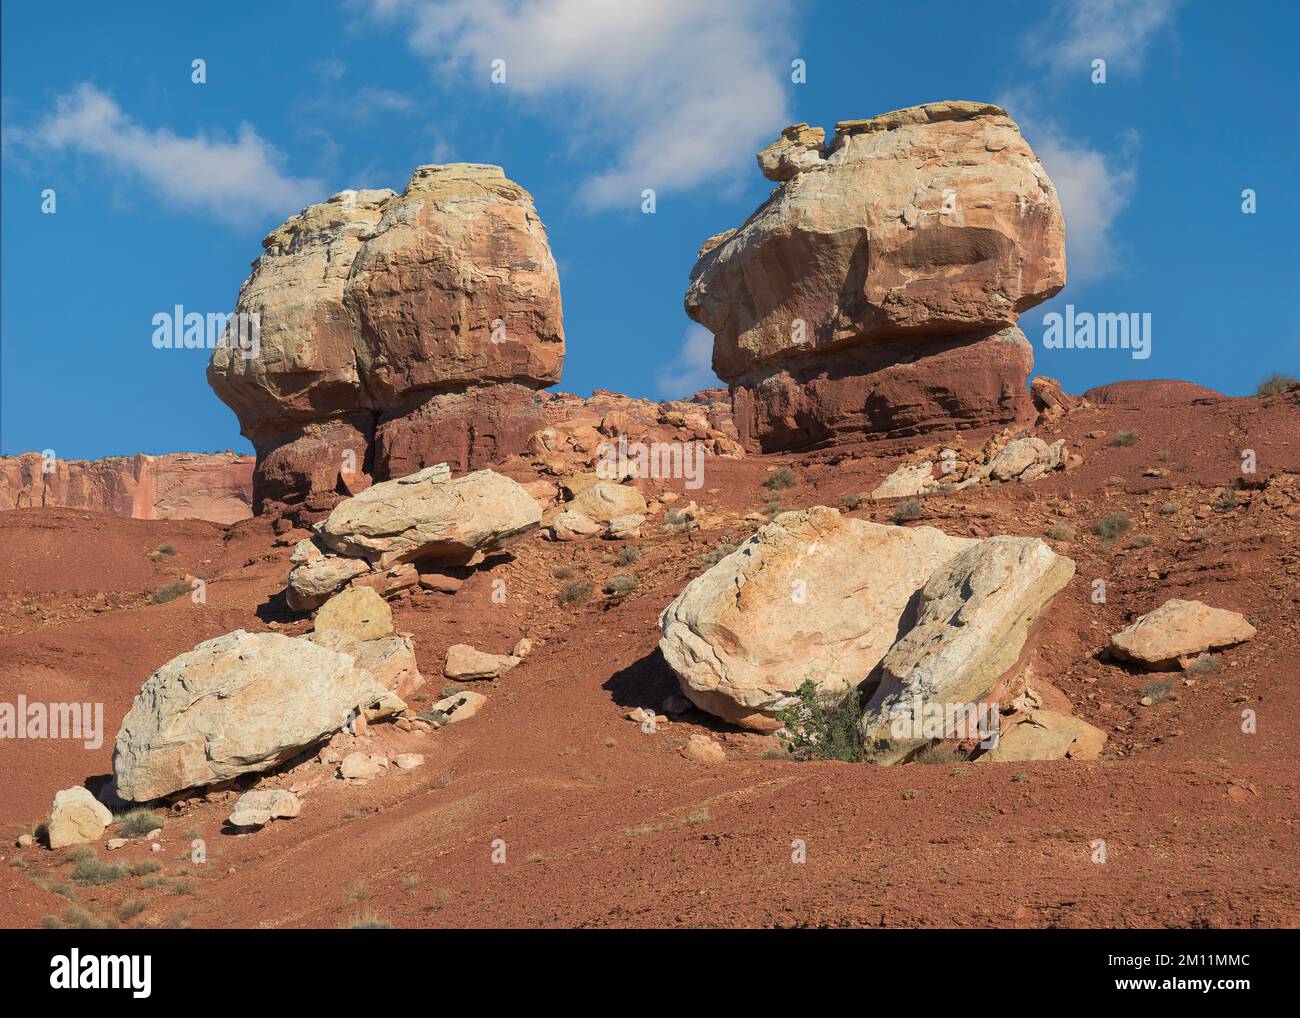 Rock formation known as the Twin Rocks along Utah State Highway 24 in Capitol Reef National Park near Torrey, Utah Stock Photo